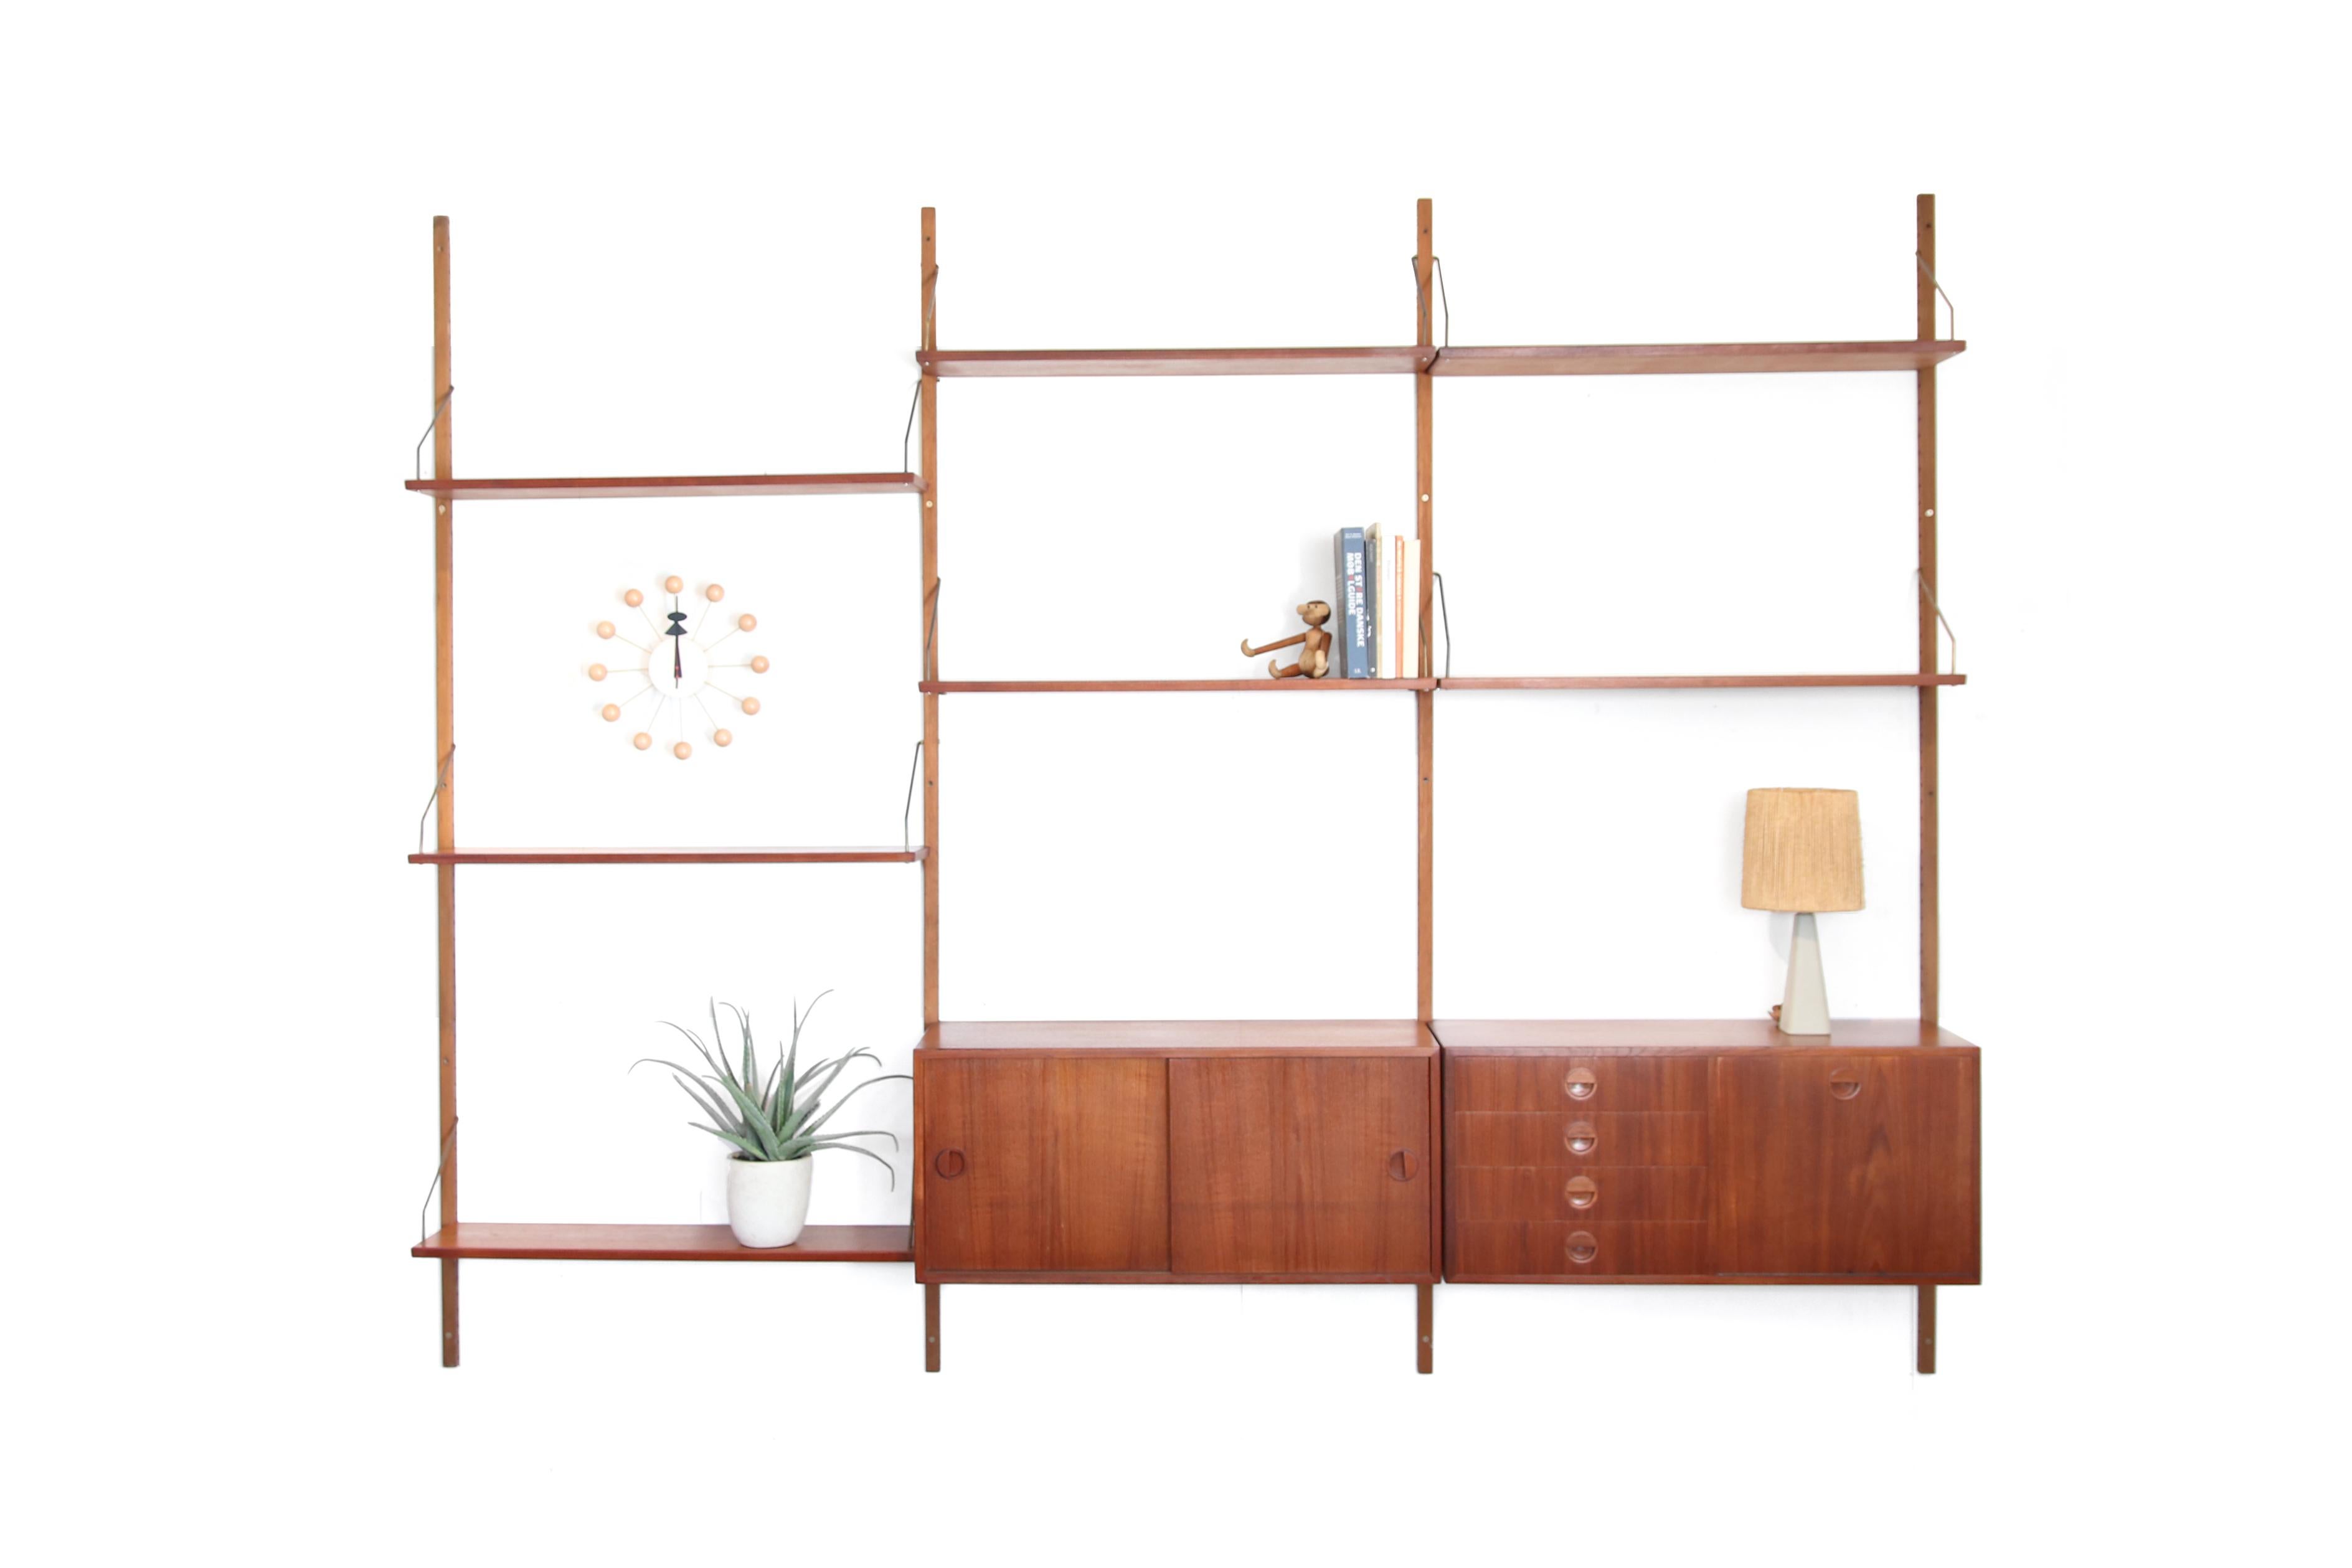 Beautiful vintage modular Danish wall cabinet designed by Rud Thygesen & Johnny Sorensen for HG Møbler. The cabinet has 4 wooden uprights, 7 shelves, a cabinet with sliding doors and a cabinet with 4 drawers and a flap. The wall system is made of